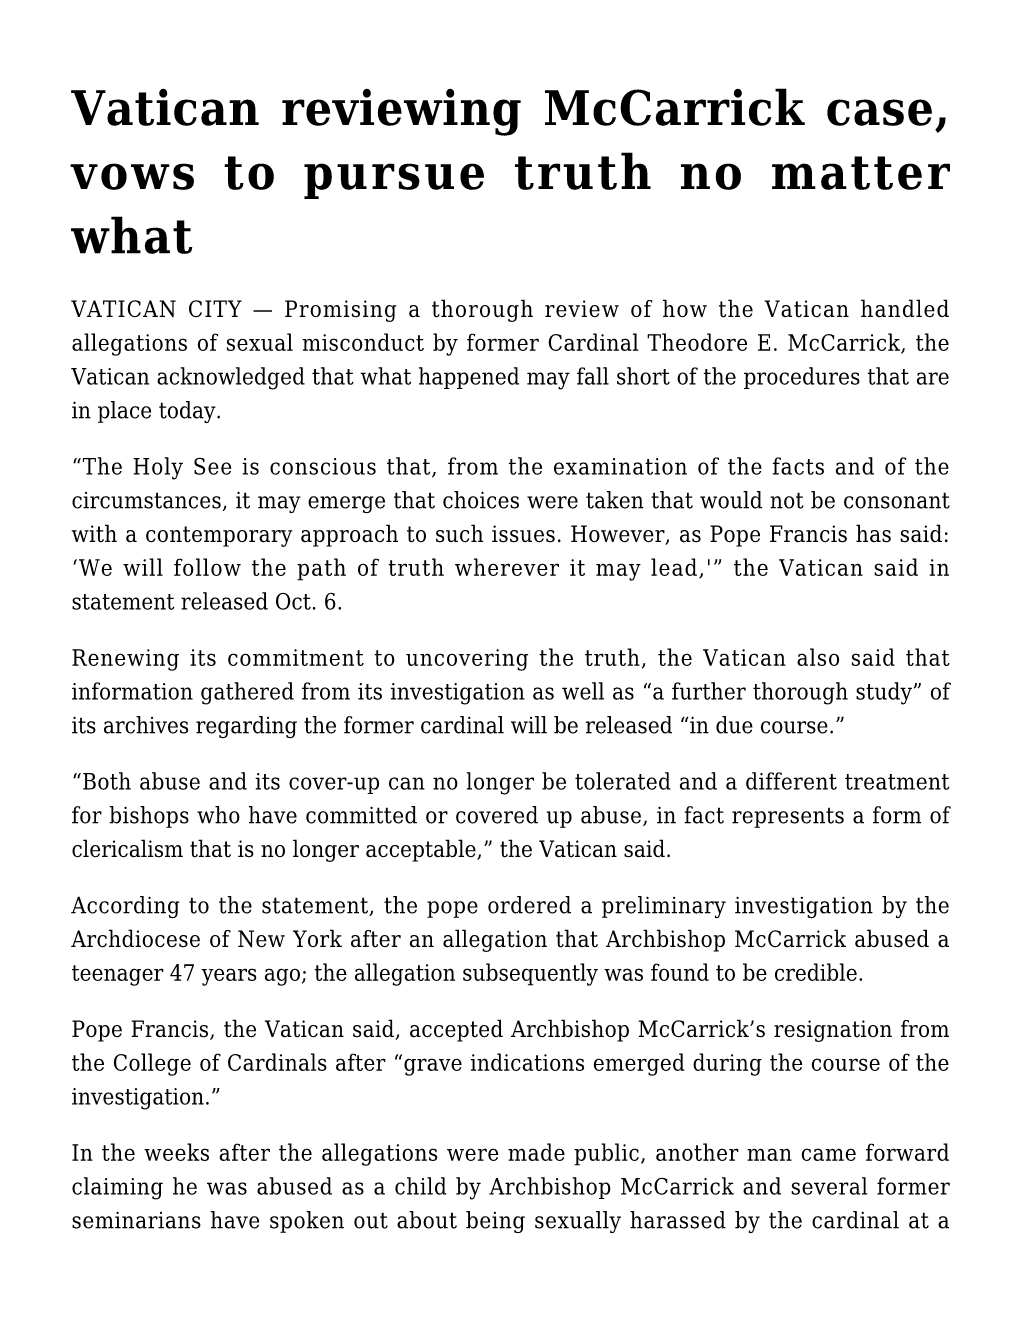 Vatican Reviewing Mccarrick Case, Vows to Pursue Truth No Matter What